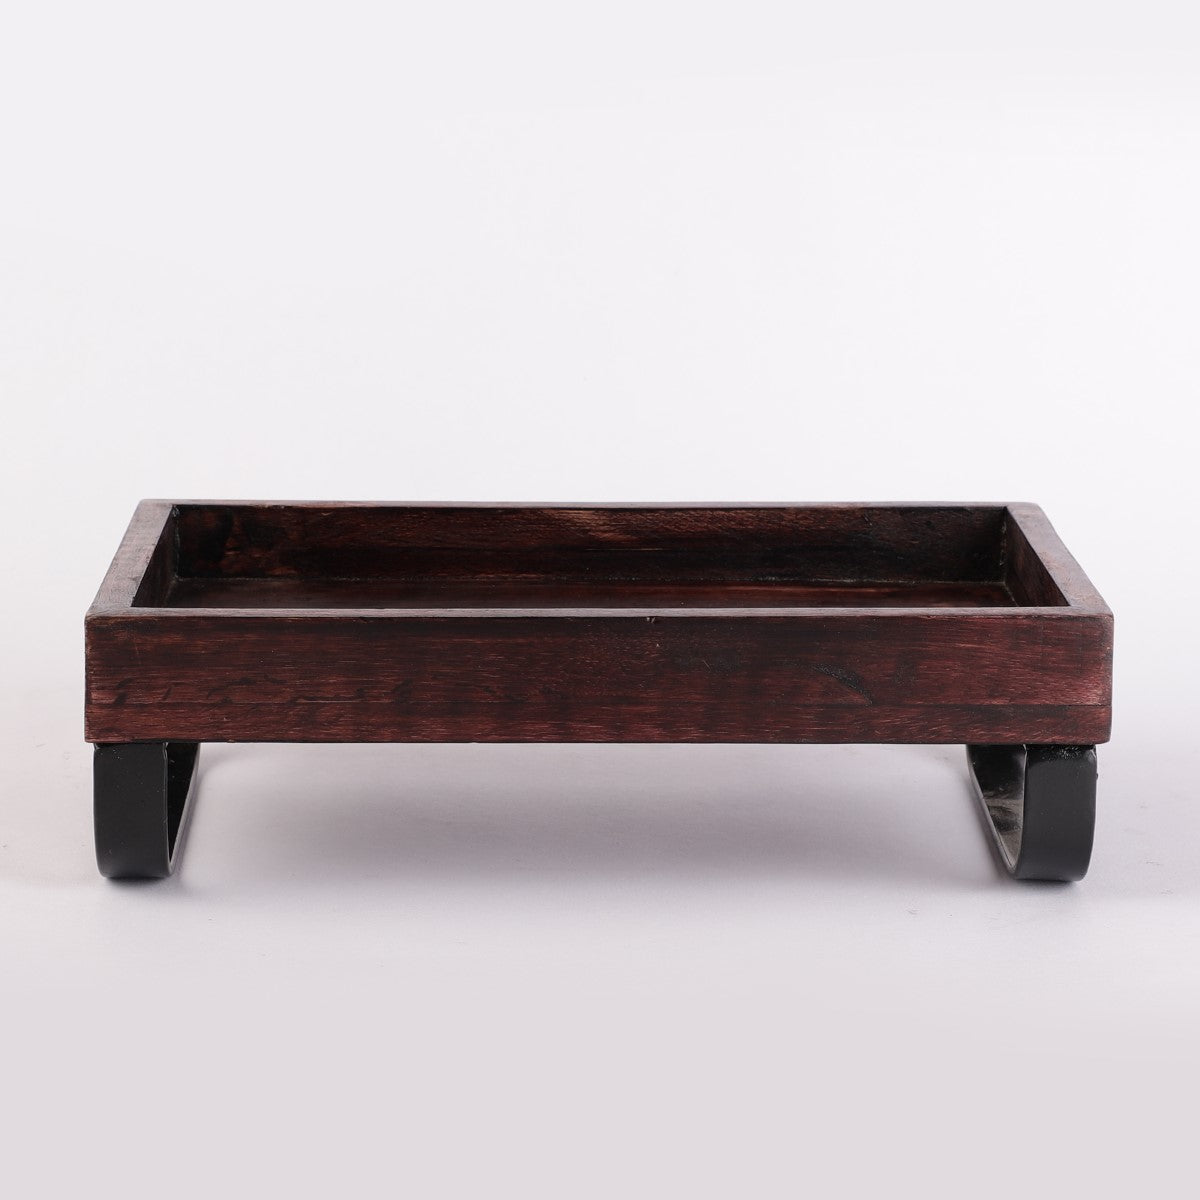 Raised Wooden Finished Serving Tray